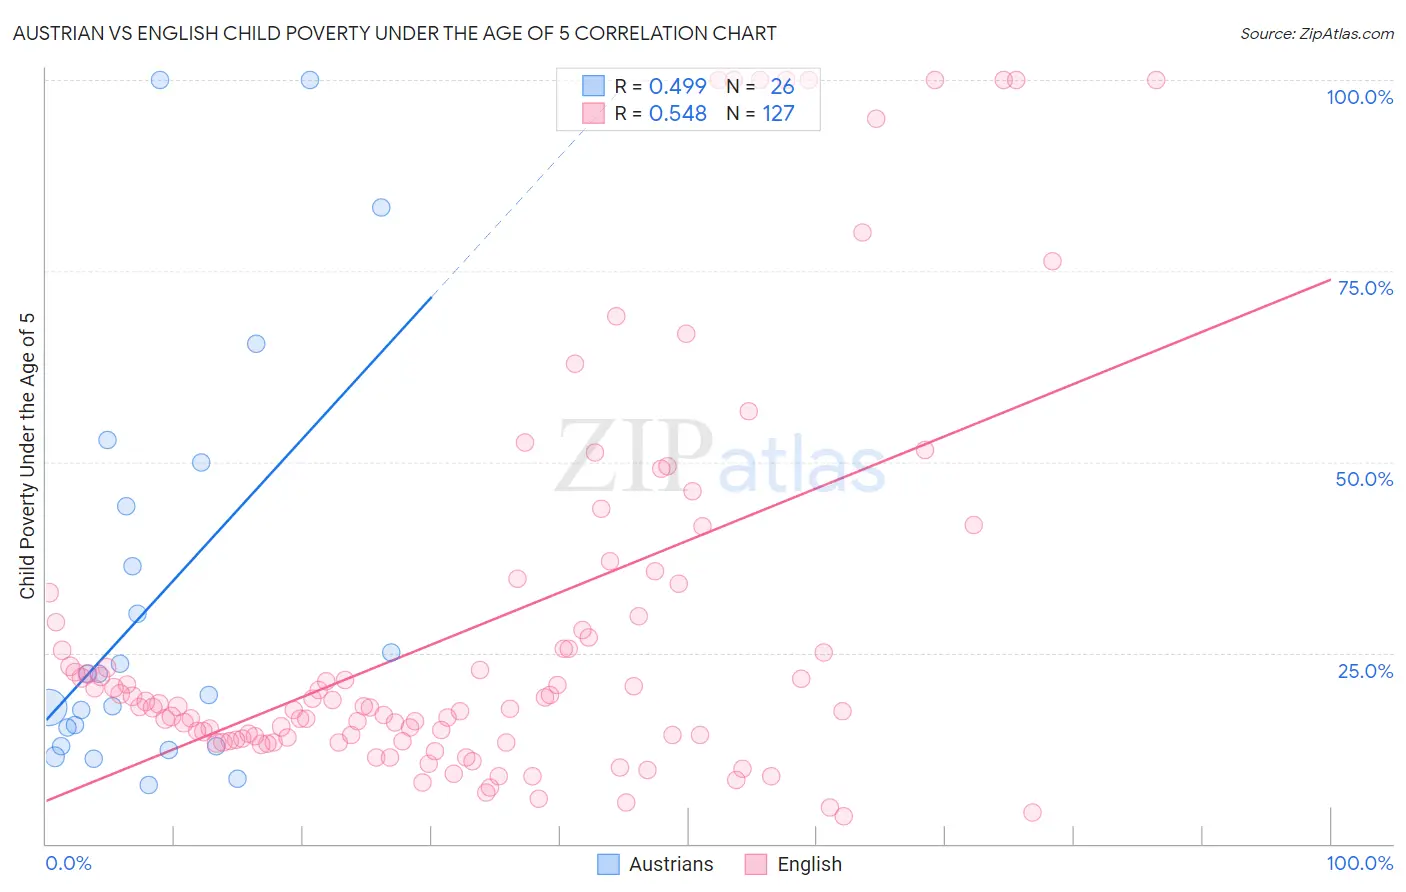 Austrian vs English Child Poverty Under the Age of 5